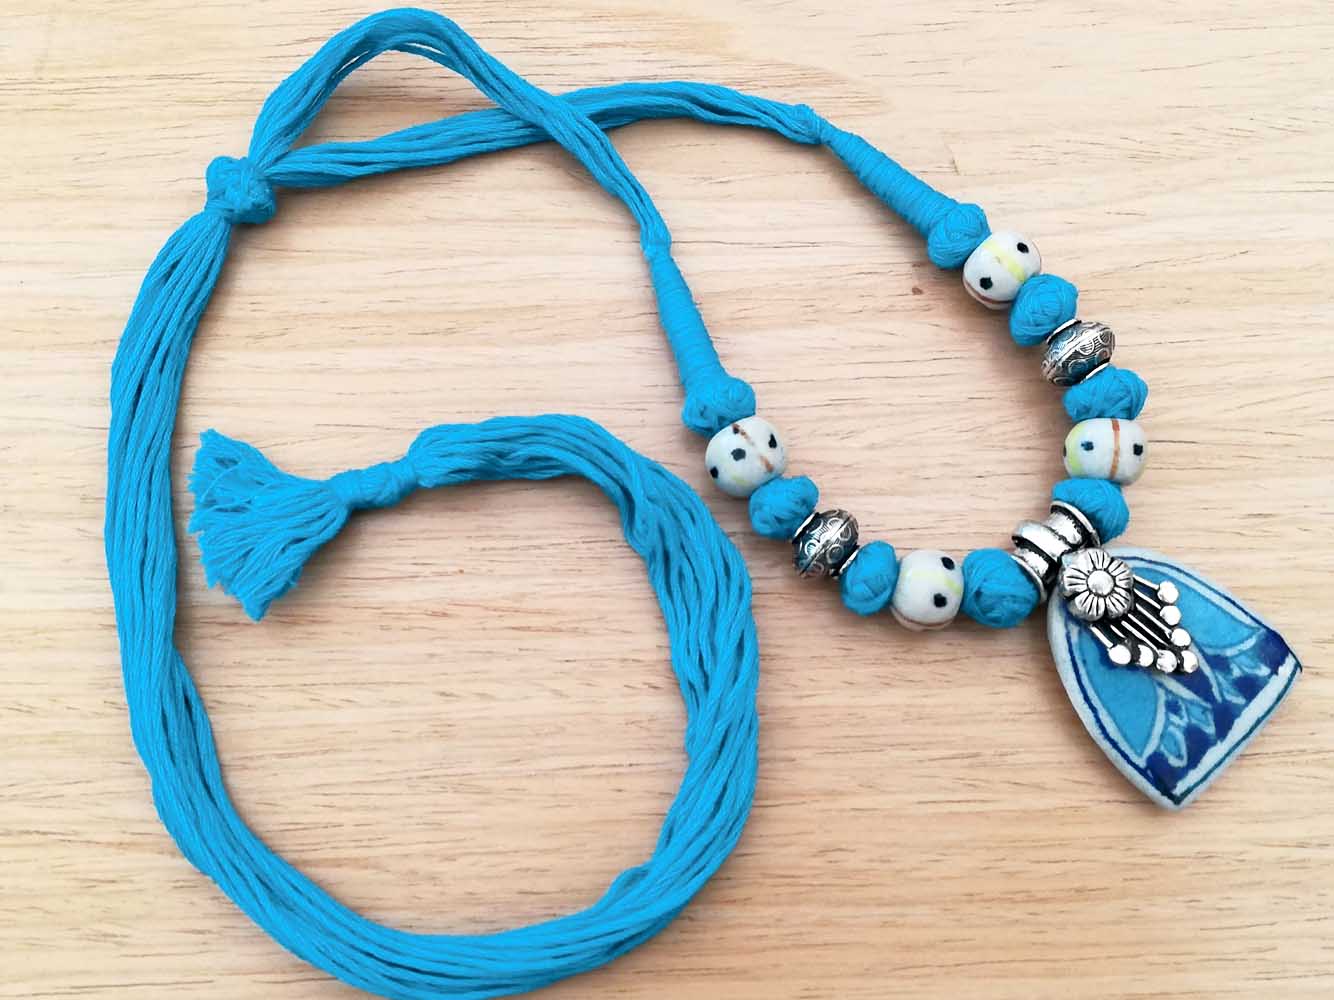 Ceramic and German silver thread necklace